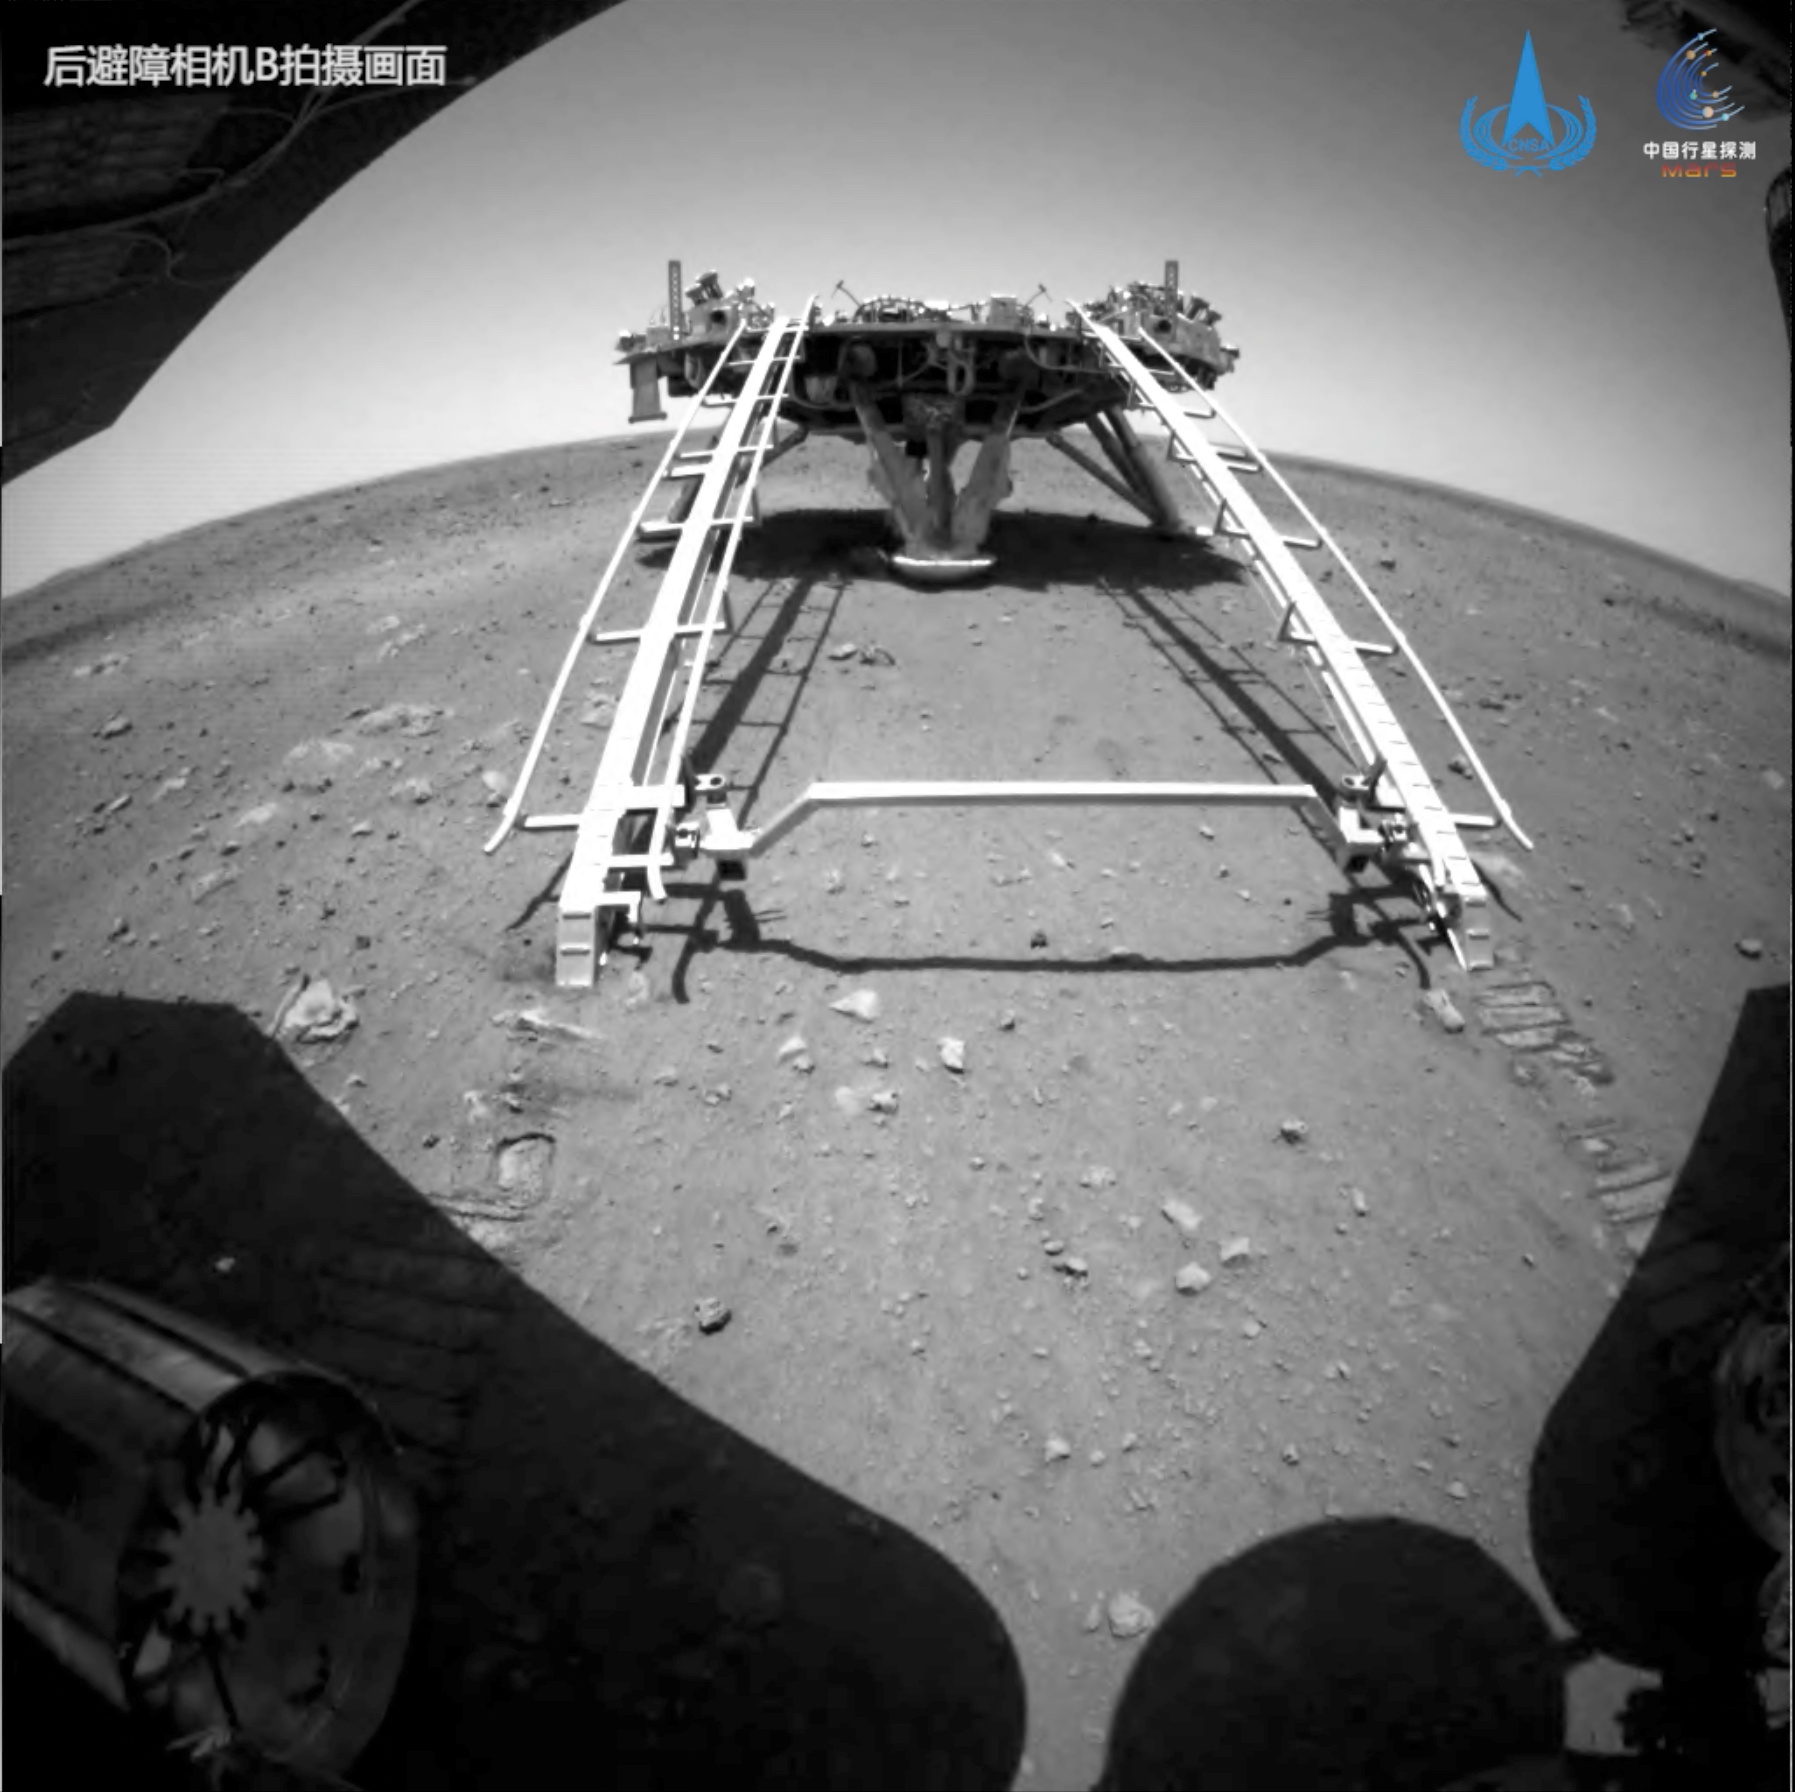 Handout image of Chinese rover Zhurong of the Tianwen-1 mission driving down the ramp of the lander onto the surface of Mars